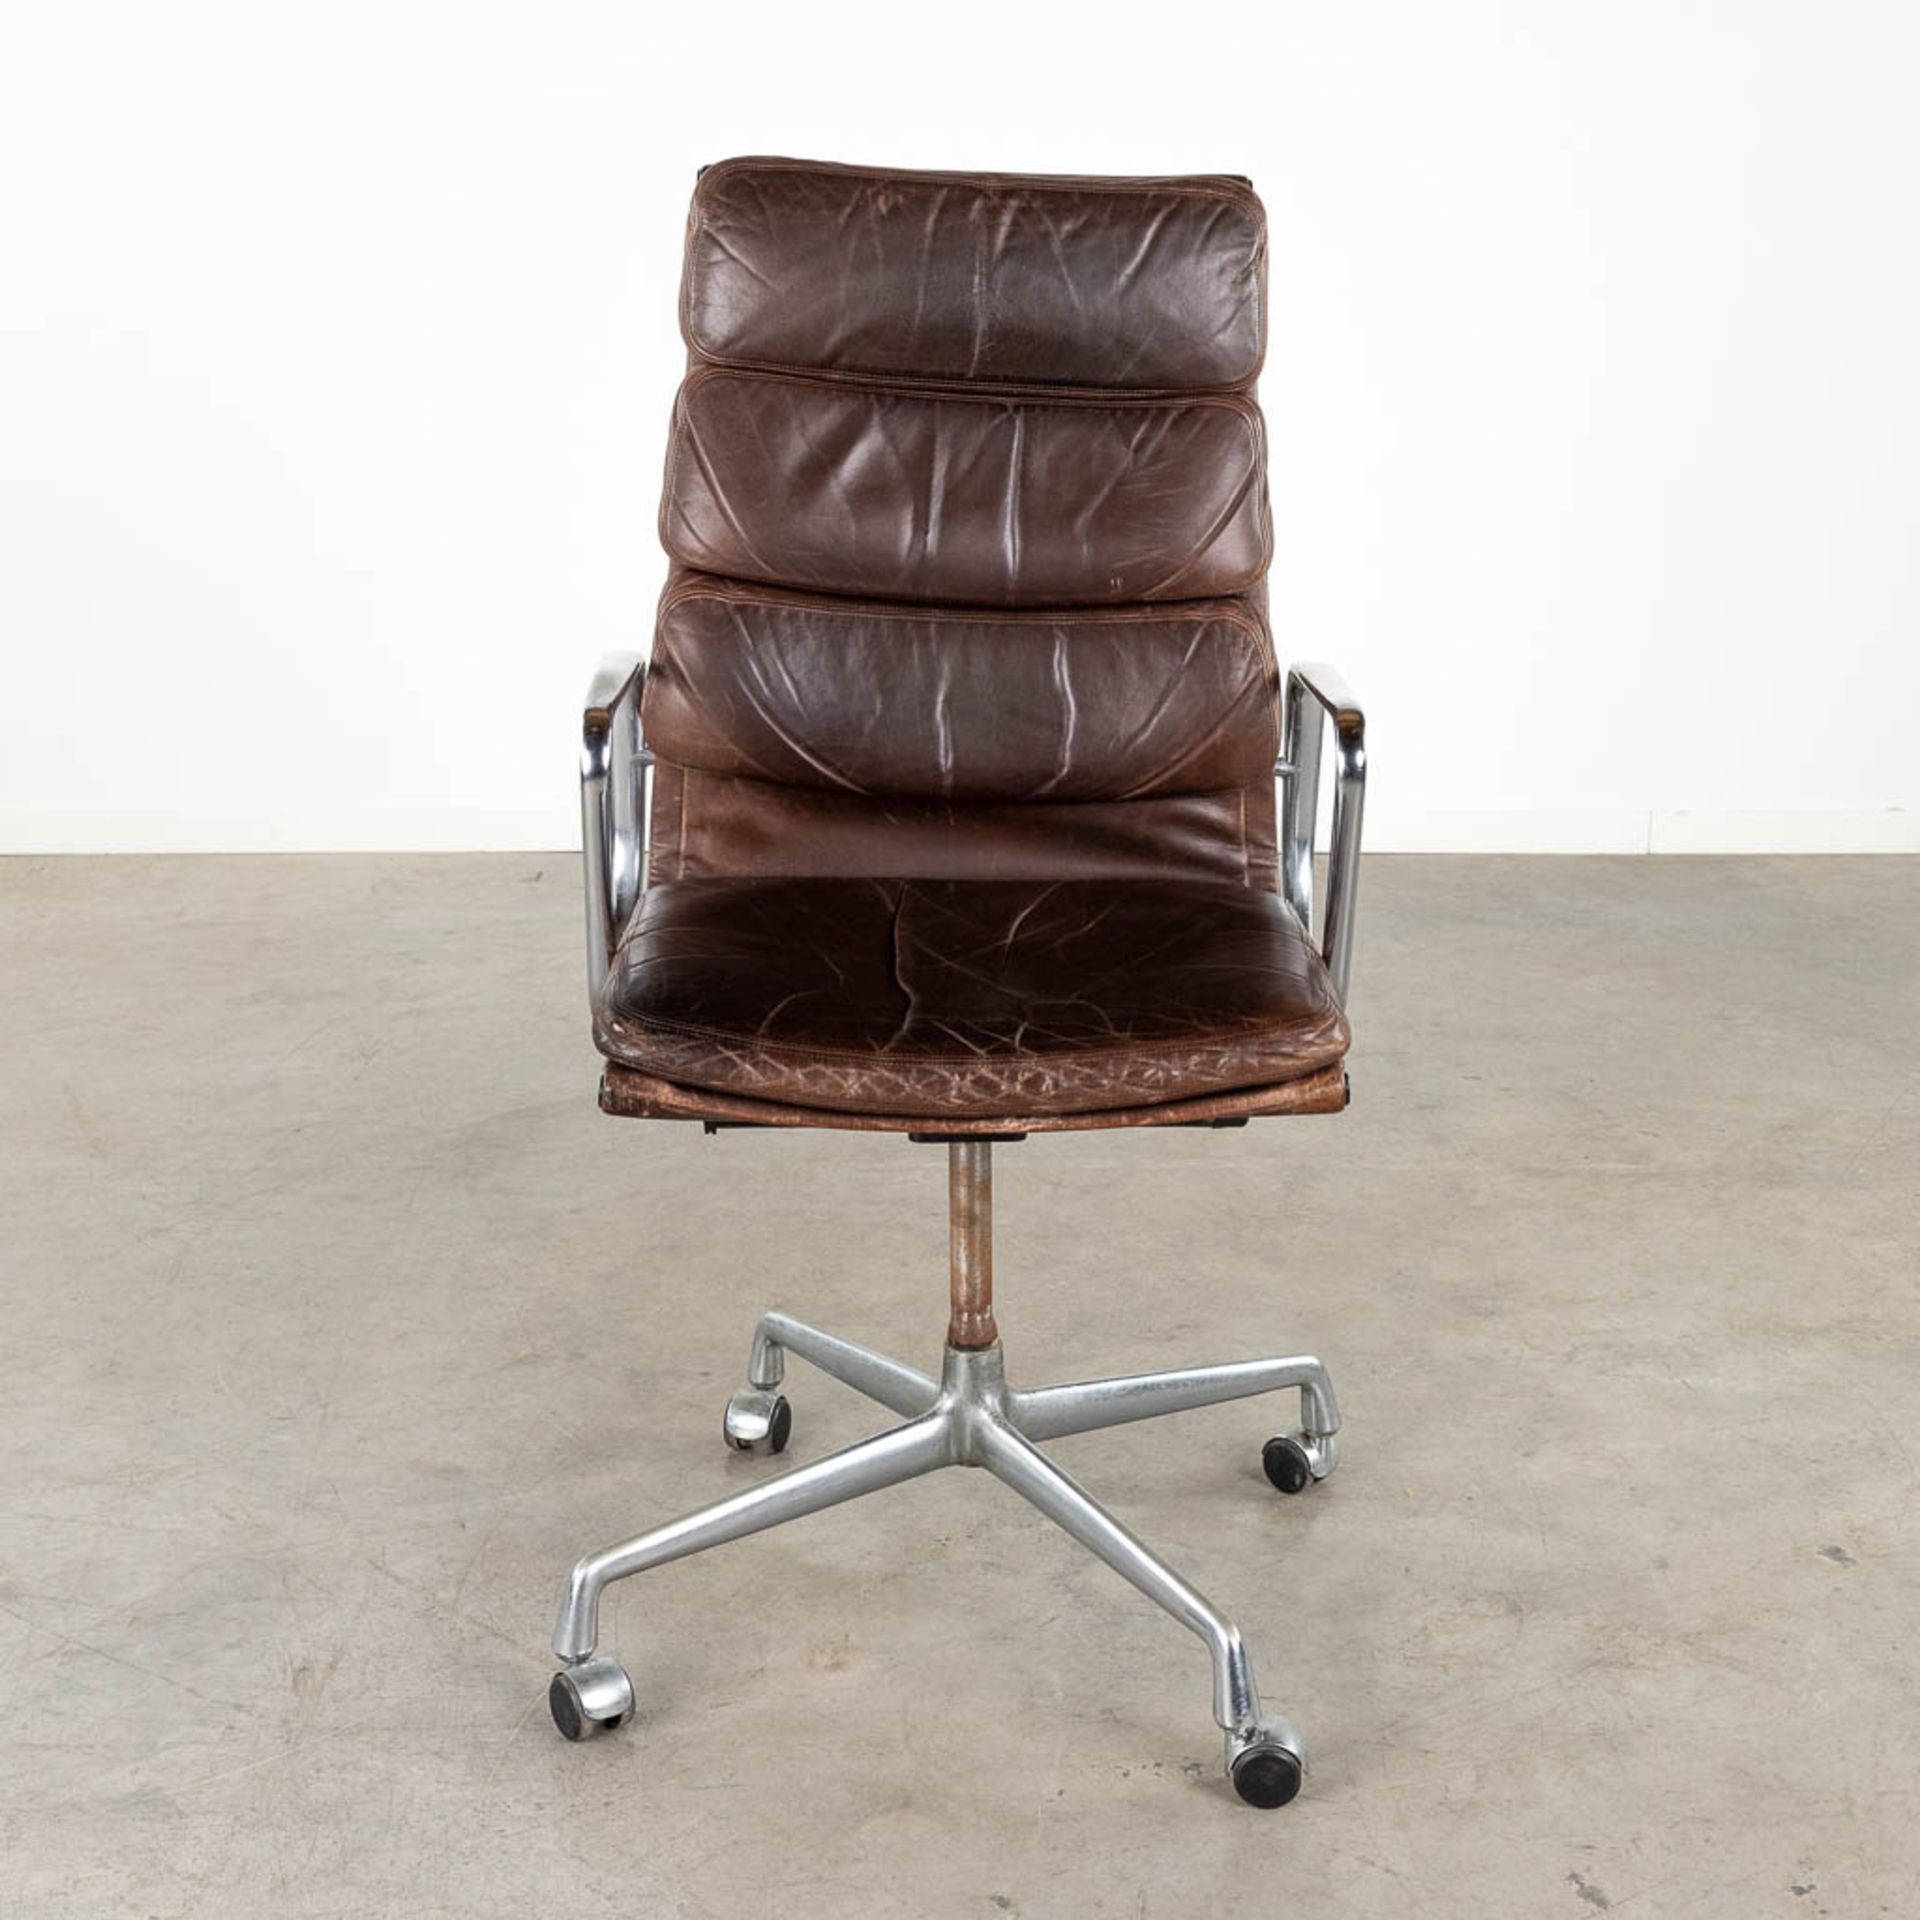 Charles &amp; Ray EAMES (XX-XXI) 'Soft Pad Office Chair' for Herman Miller. (D:111 x W:59 x H:63 cm) - Image 3 of 12